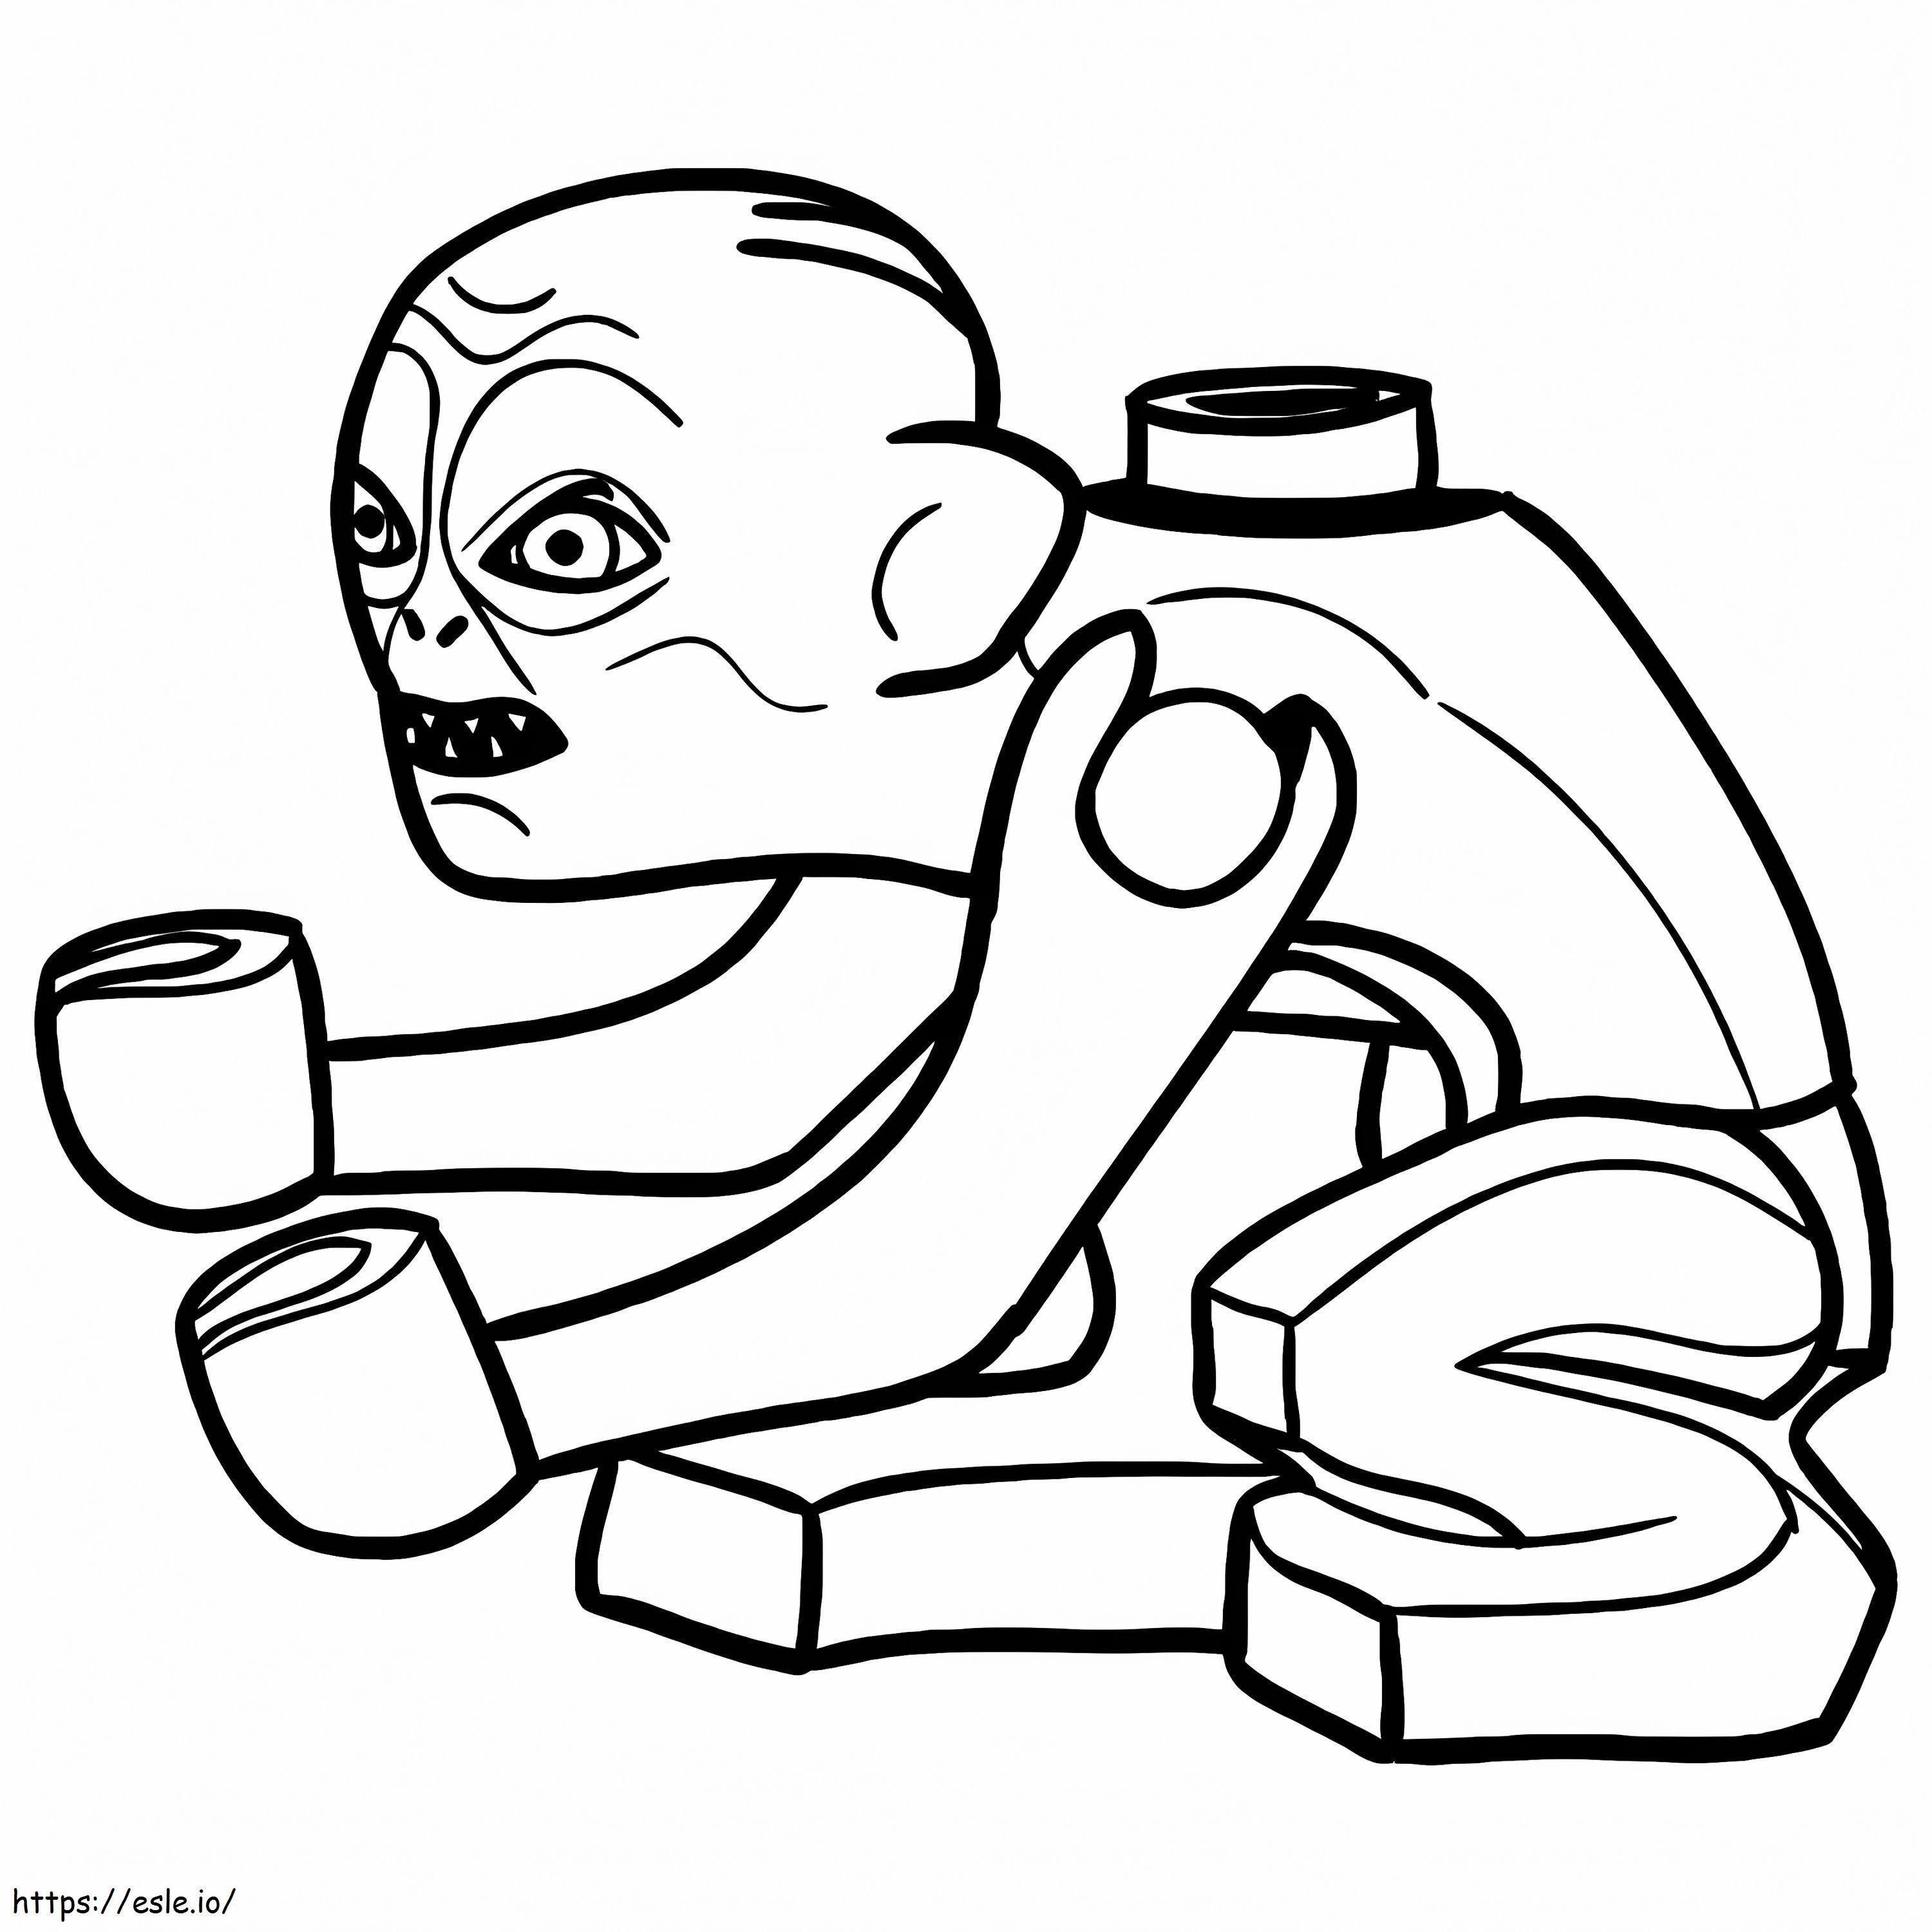 Read Gollum coloring page